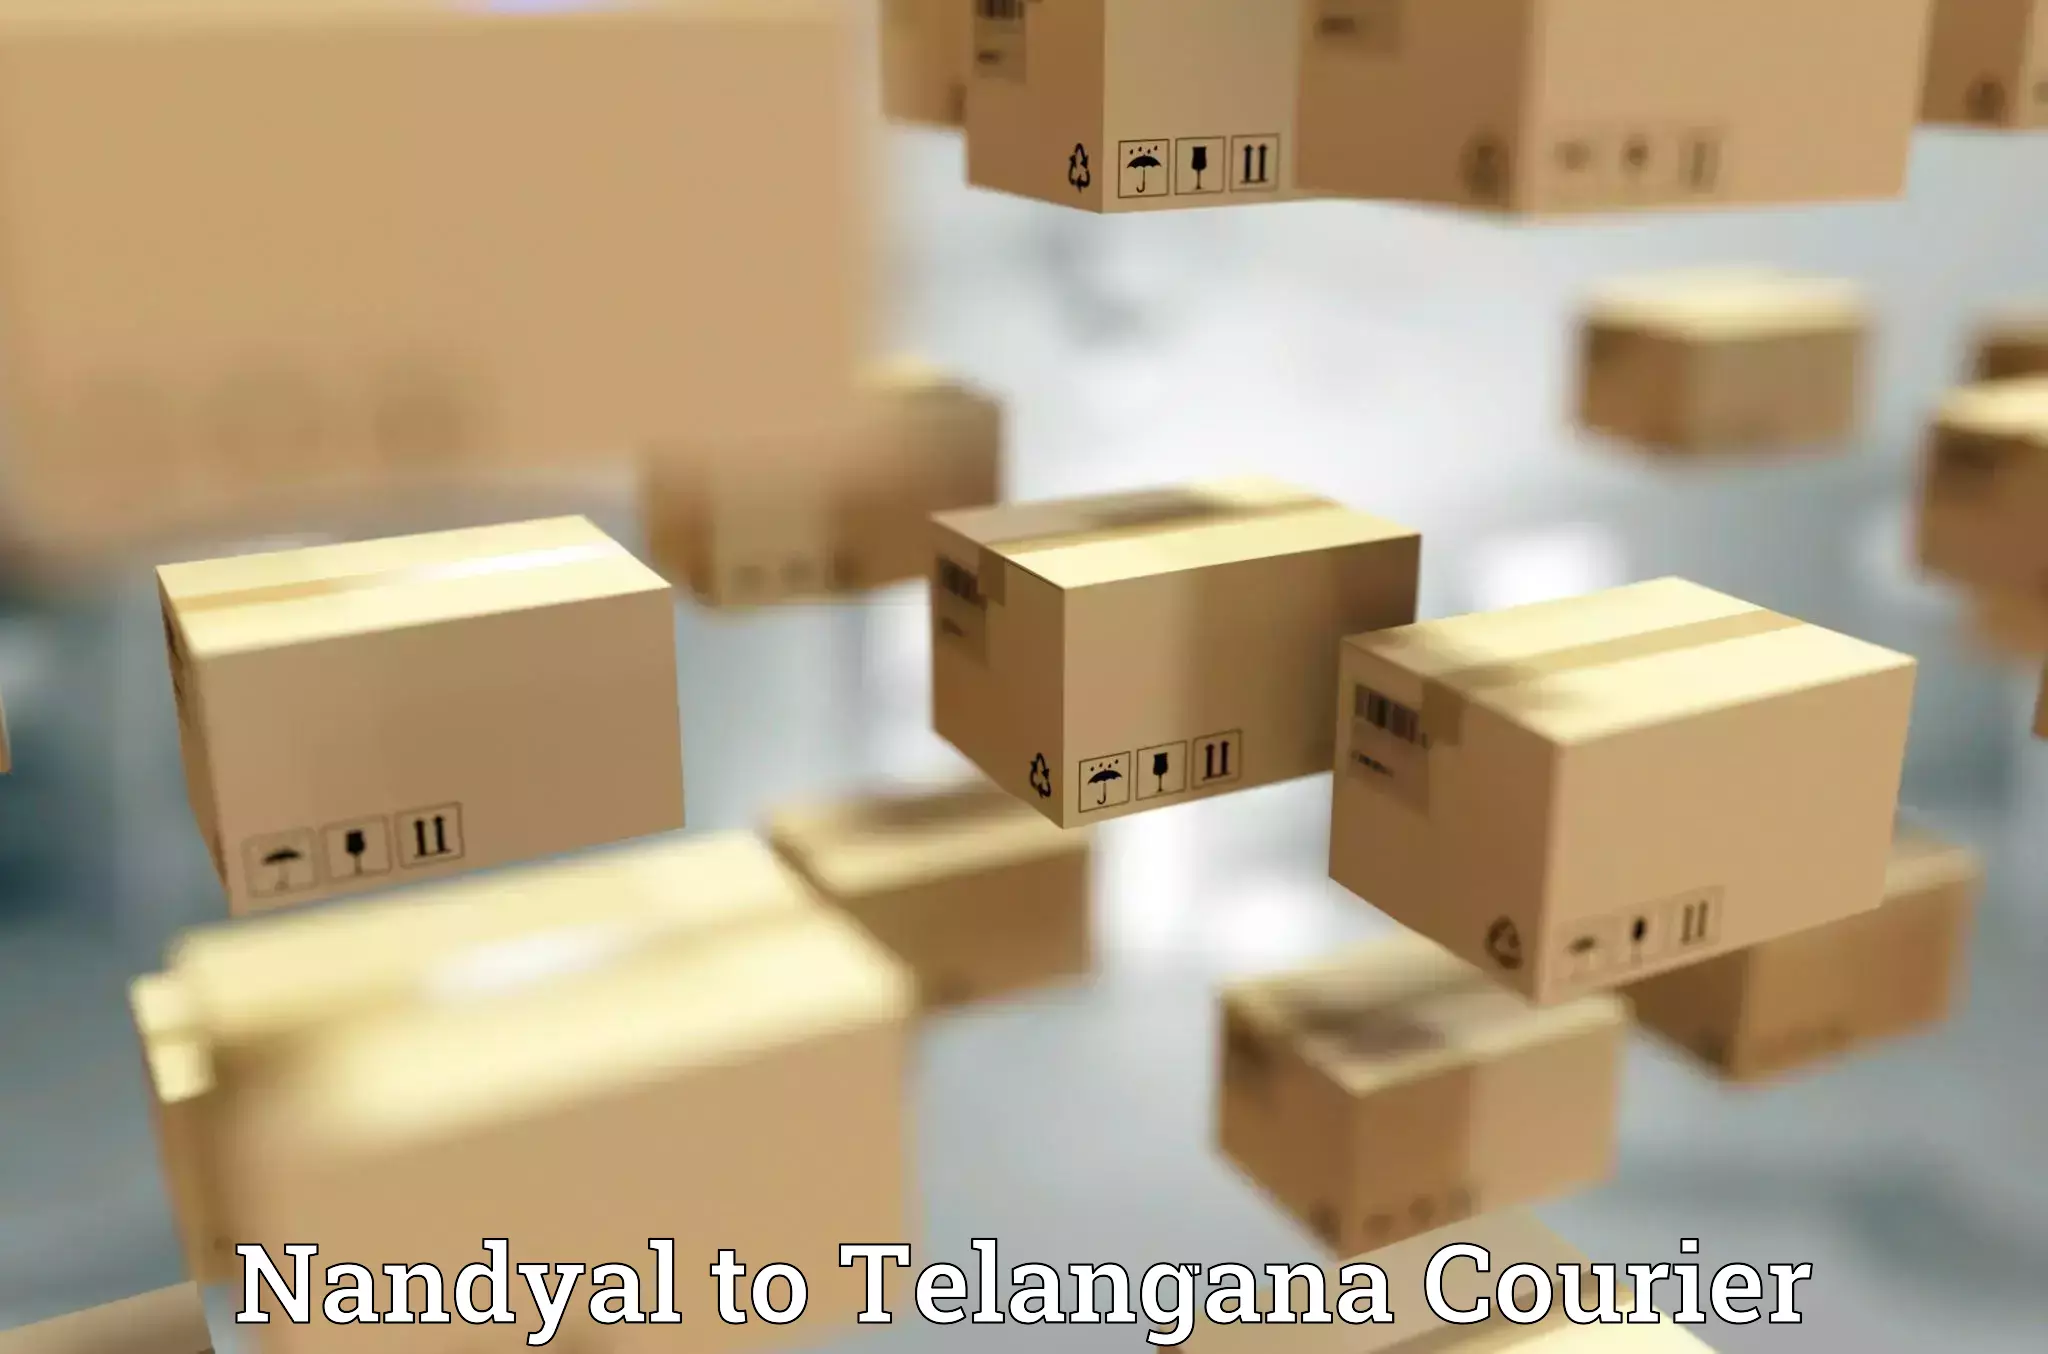 Urgent courier needs Nandyal to Sangareddy